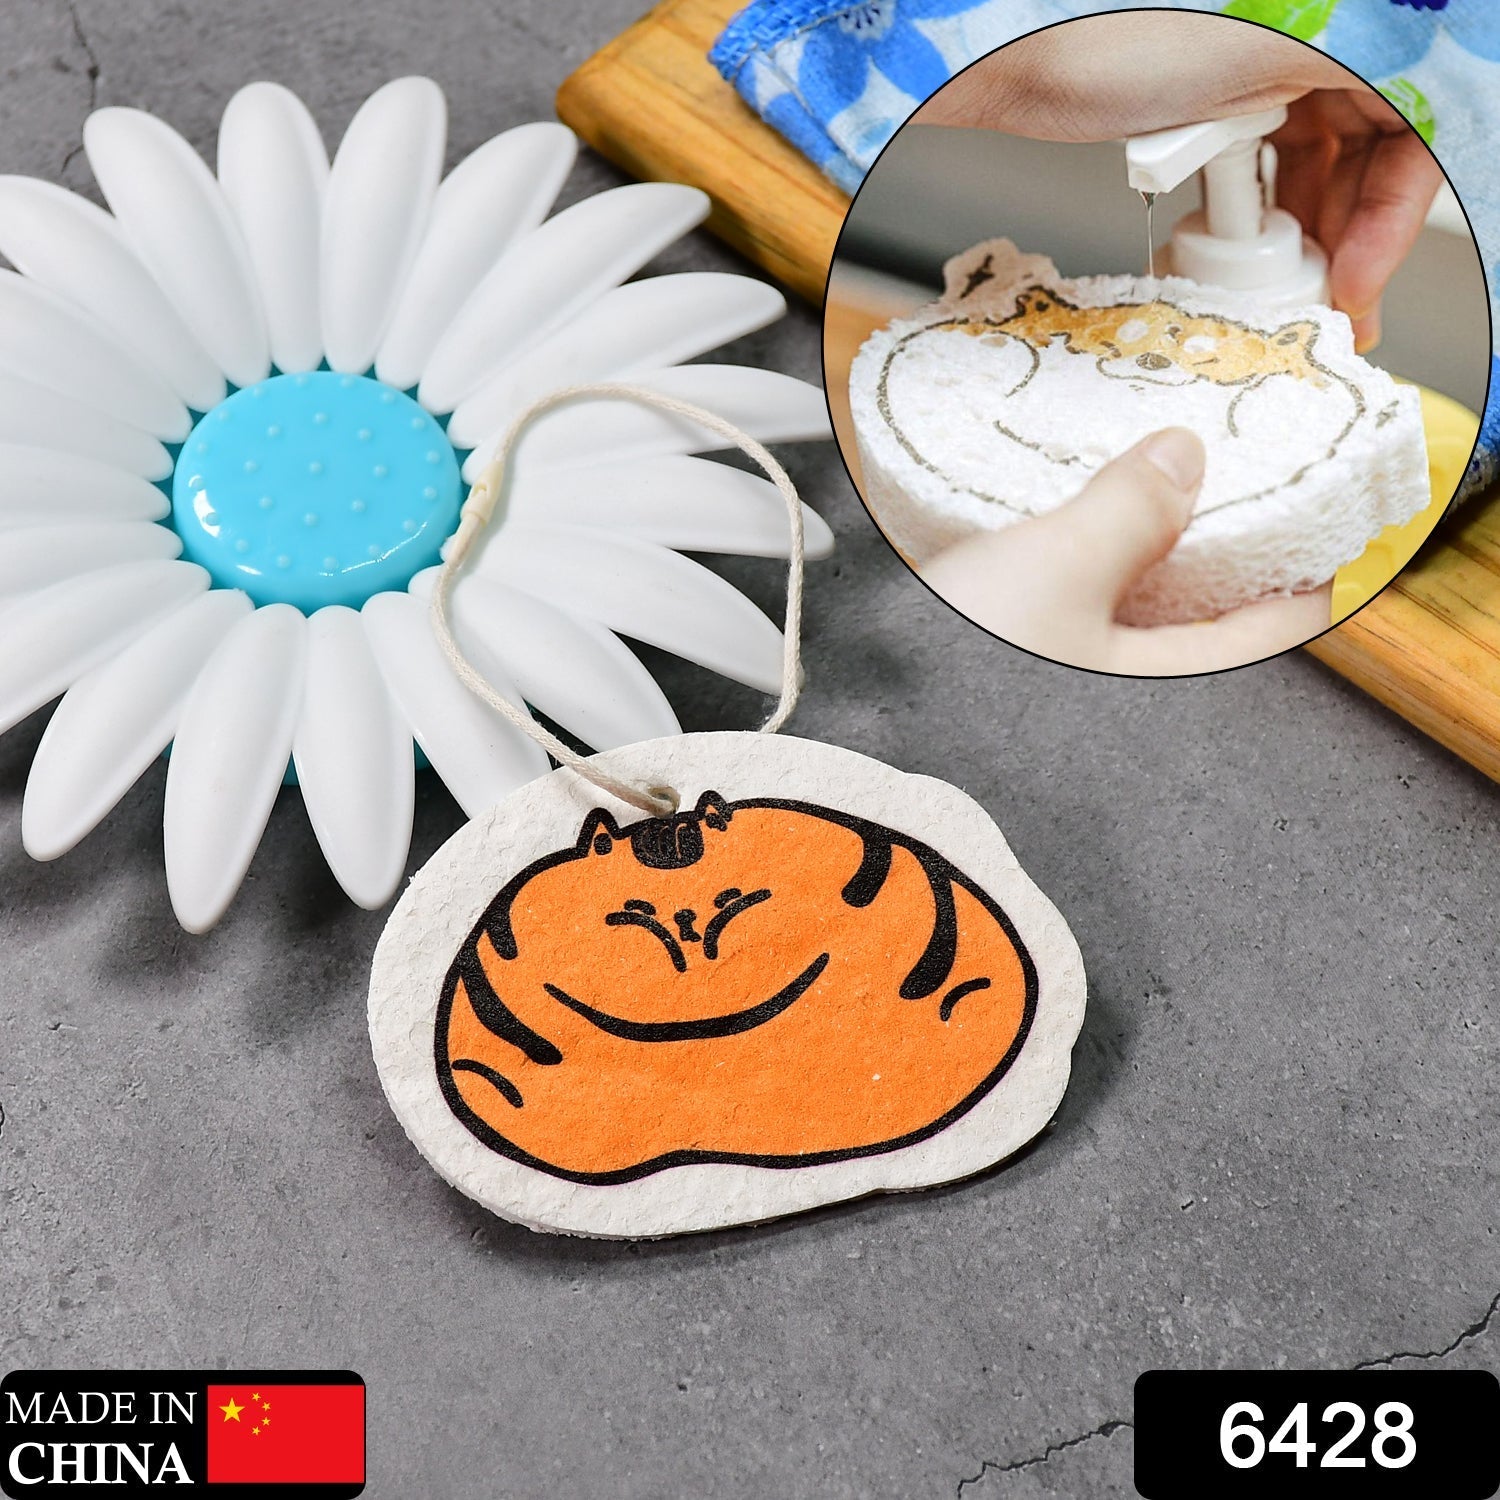 6428 Compressed Wood Pulp Sponge. Creative Cartoon Design Scouring Pad Dishwashing Absorbing Pad. Kitchen Cleaning Tool. 